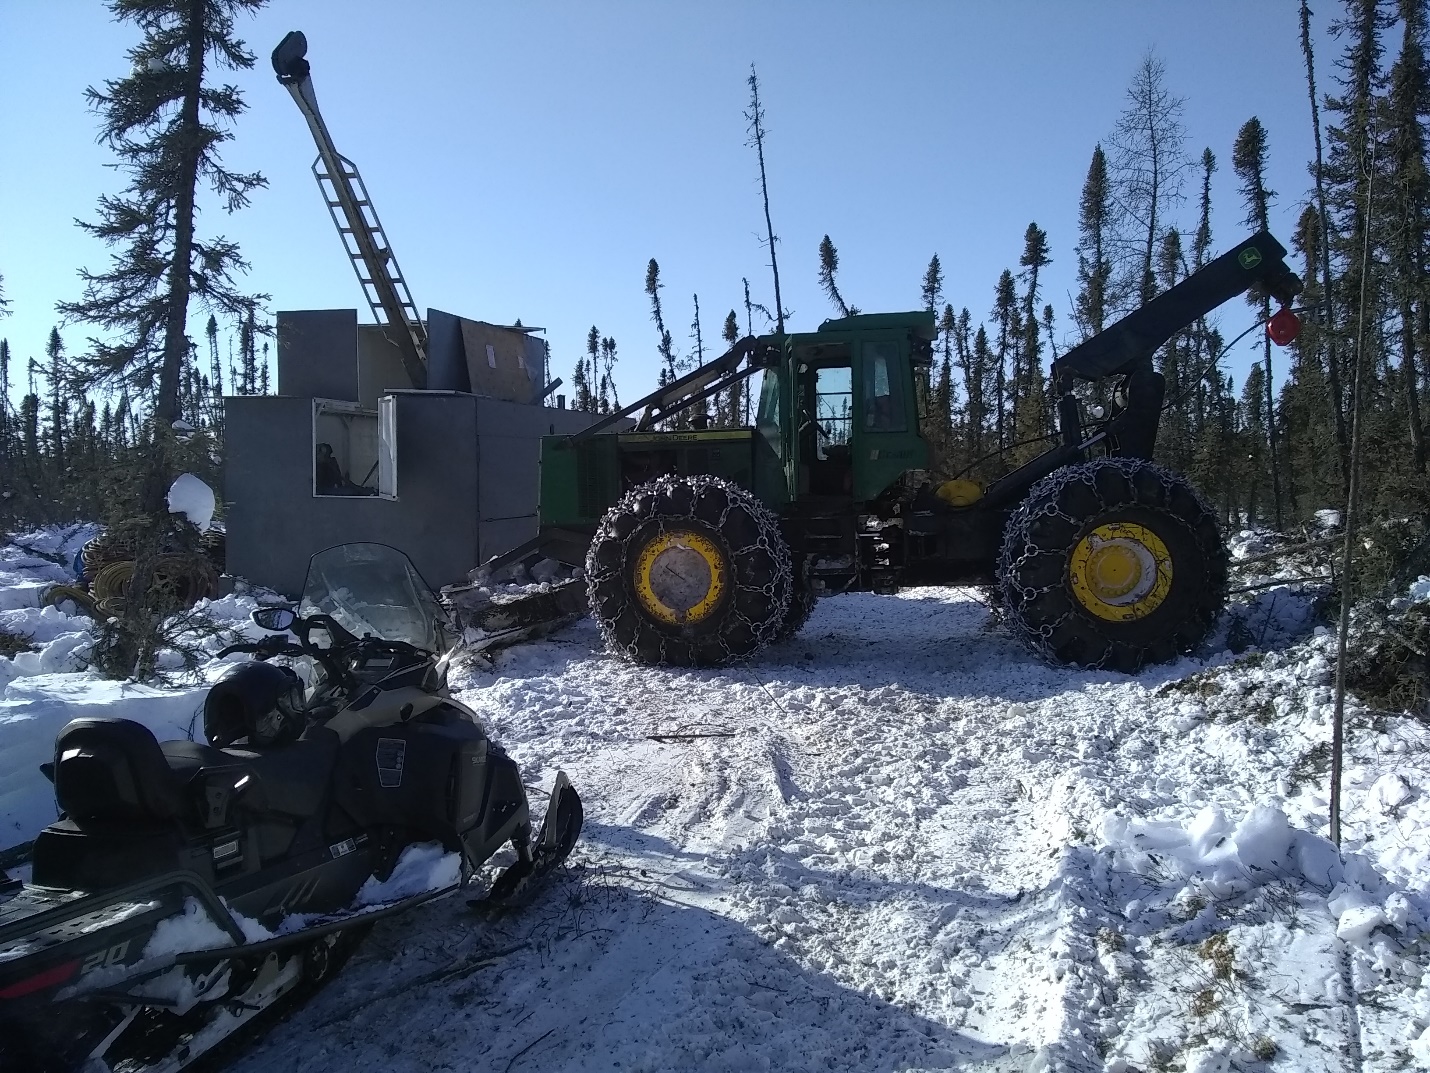 A photograph of the crew mobilizing the diamond drill rig in snow.